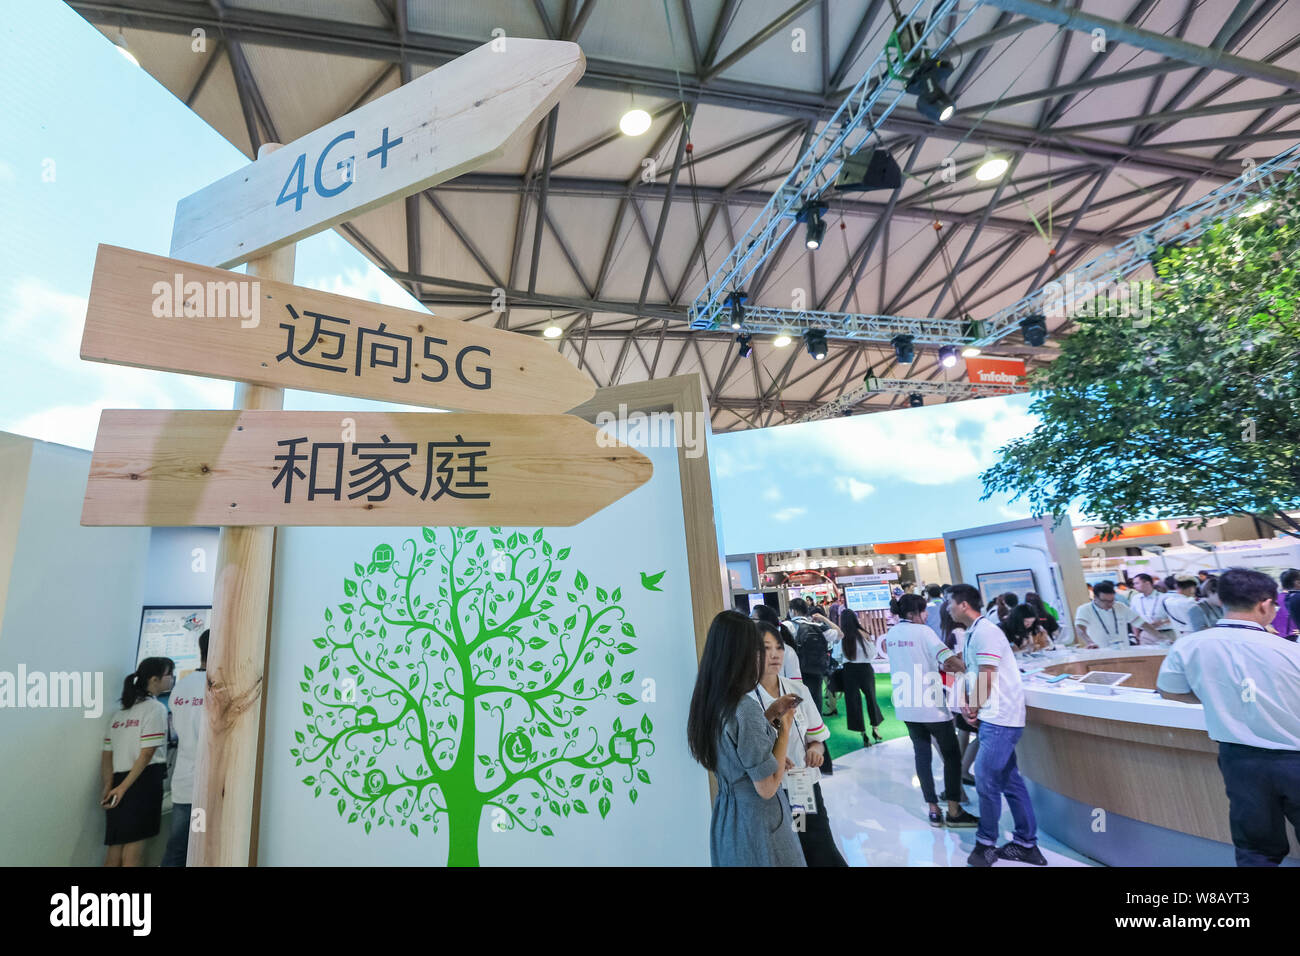 Signboards of 4G+ and 5G networks are display at the stand of ZTE during the 2016 Mobile World Congress (MWC) in Shanghai, China, 29 June 2016.   Give Stock Photo